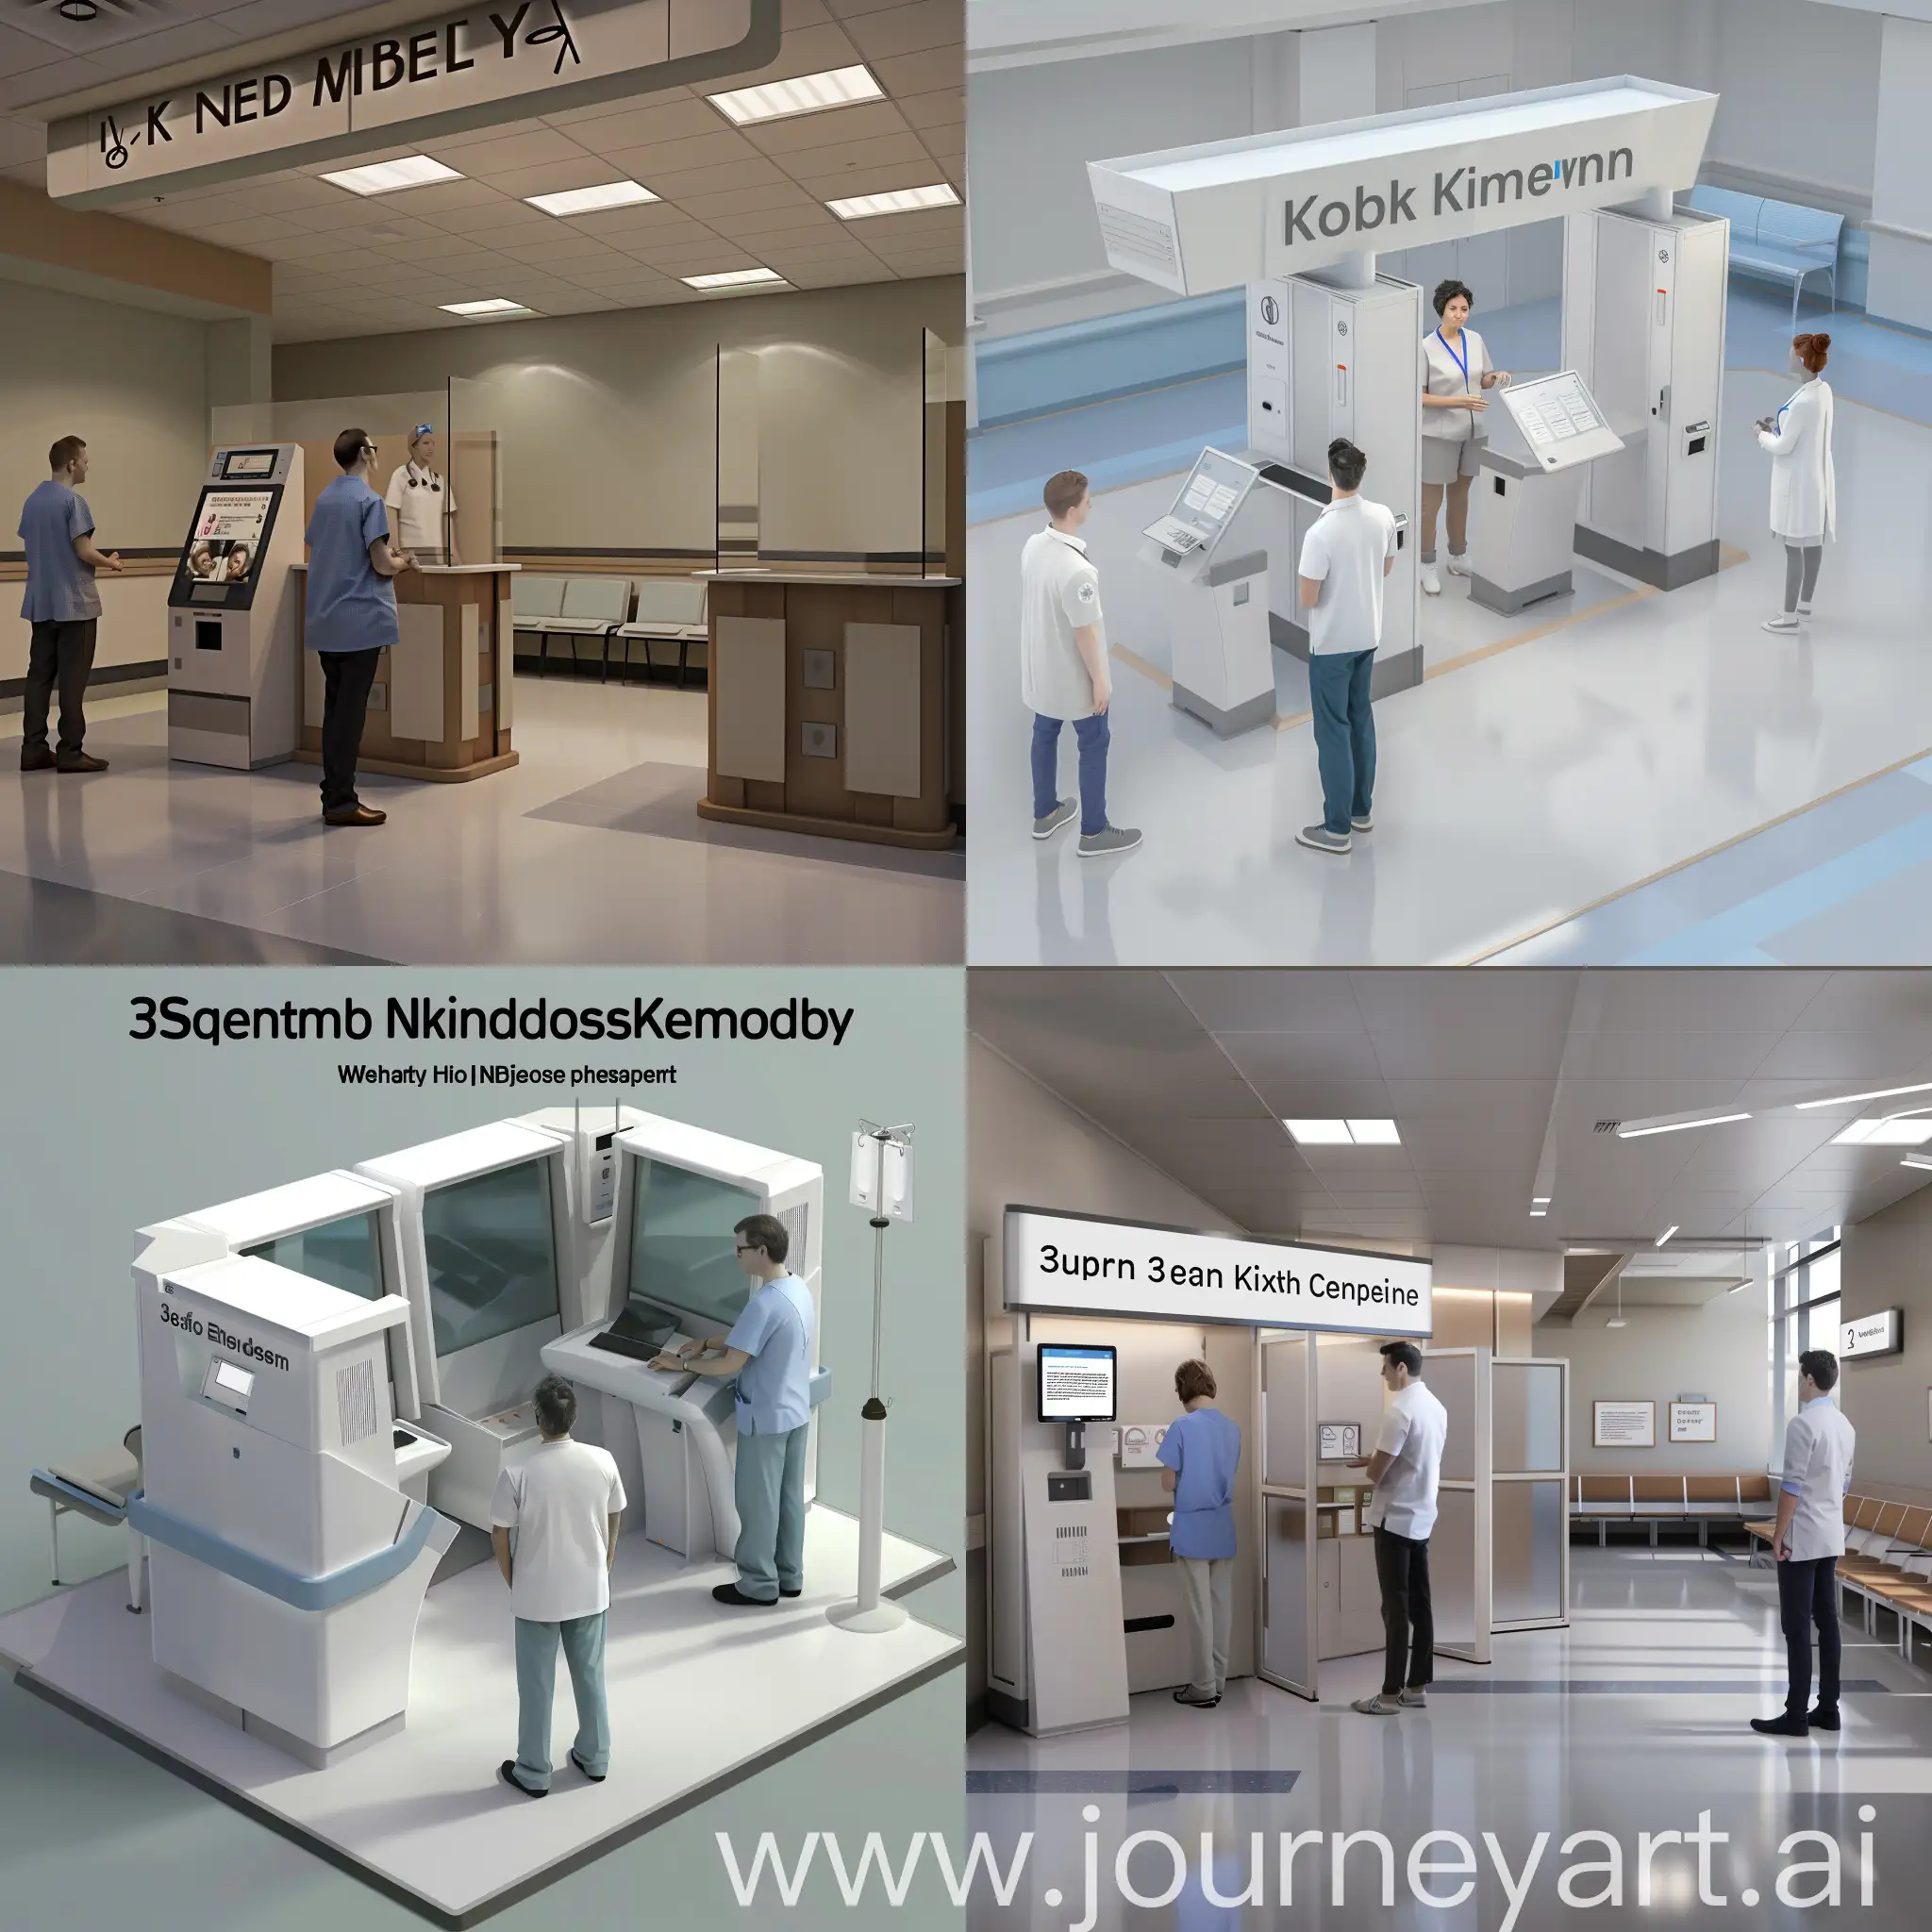 Standing Kiosk Area in Hospital:  The 3D design should be sharp and realistic. It should show patients using the kiosk. There should be a support staff member standing by. The kiosk should have partitions to ensure privacy for patients while using the kiosk. There should be a waiting area nearby.